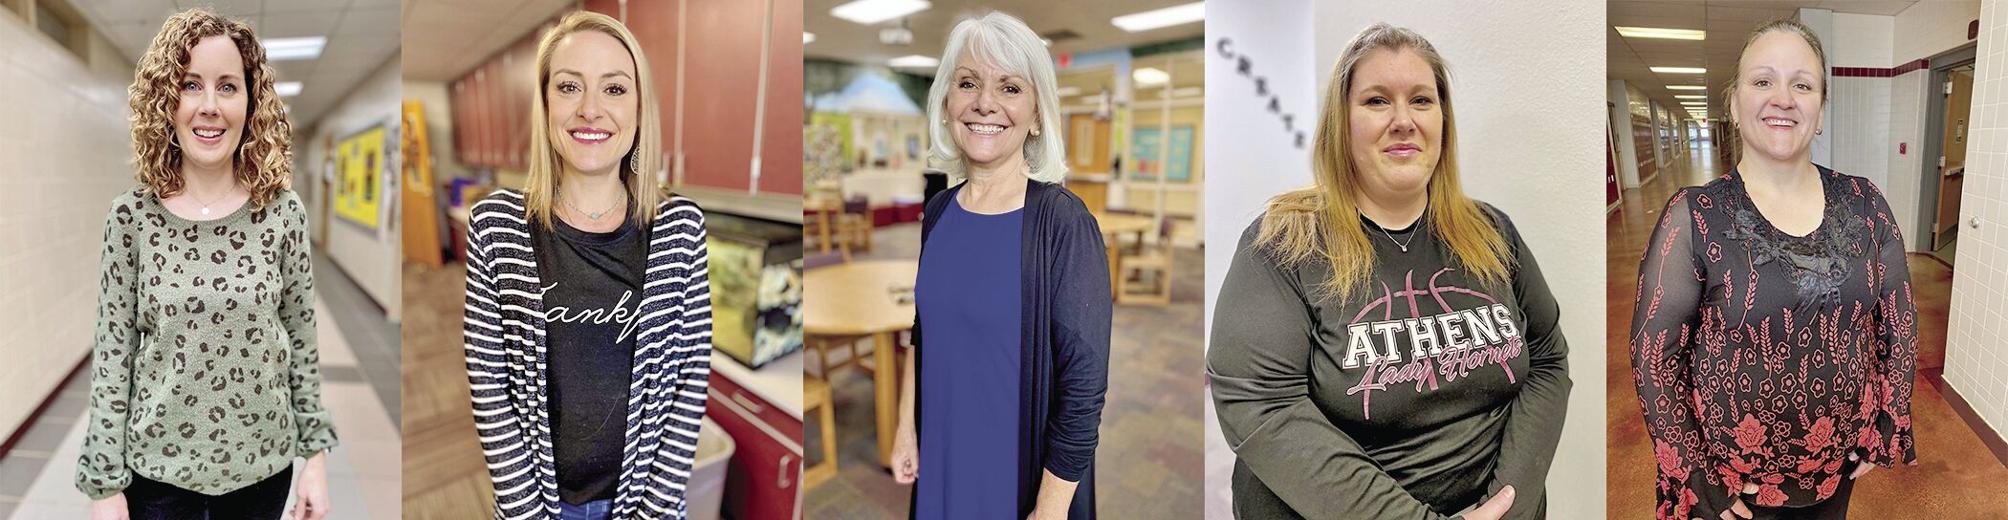 Athens ISD names Teachers of the Year News athensreview com